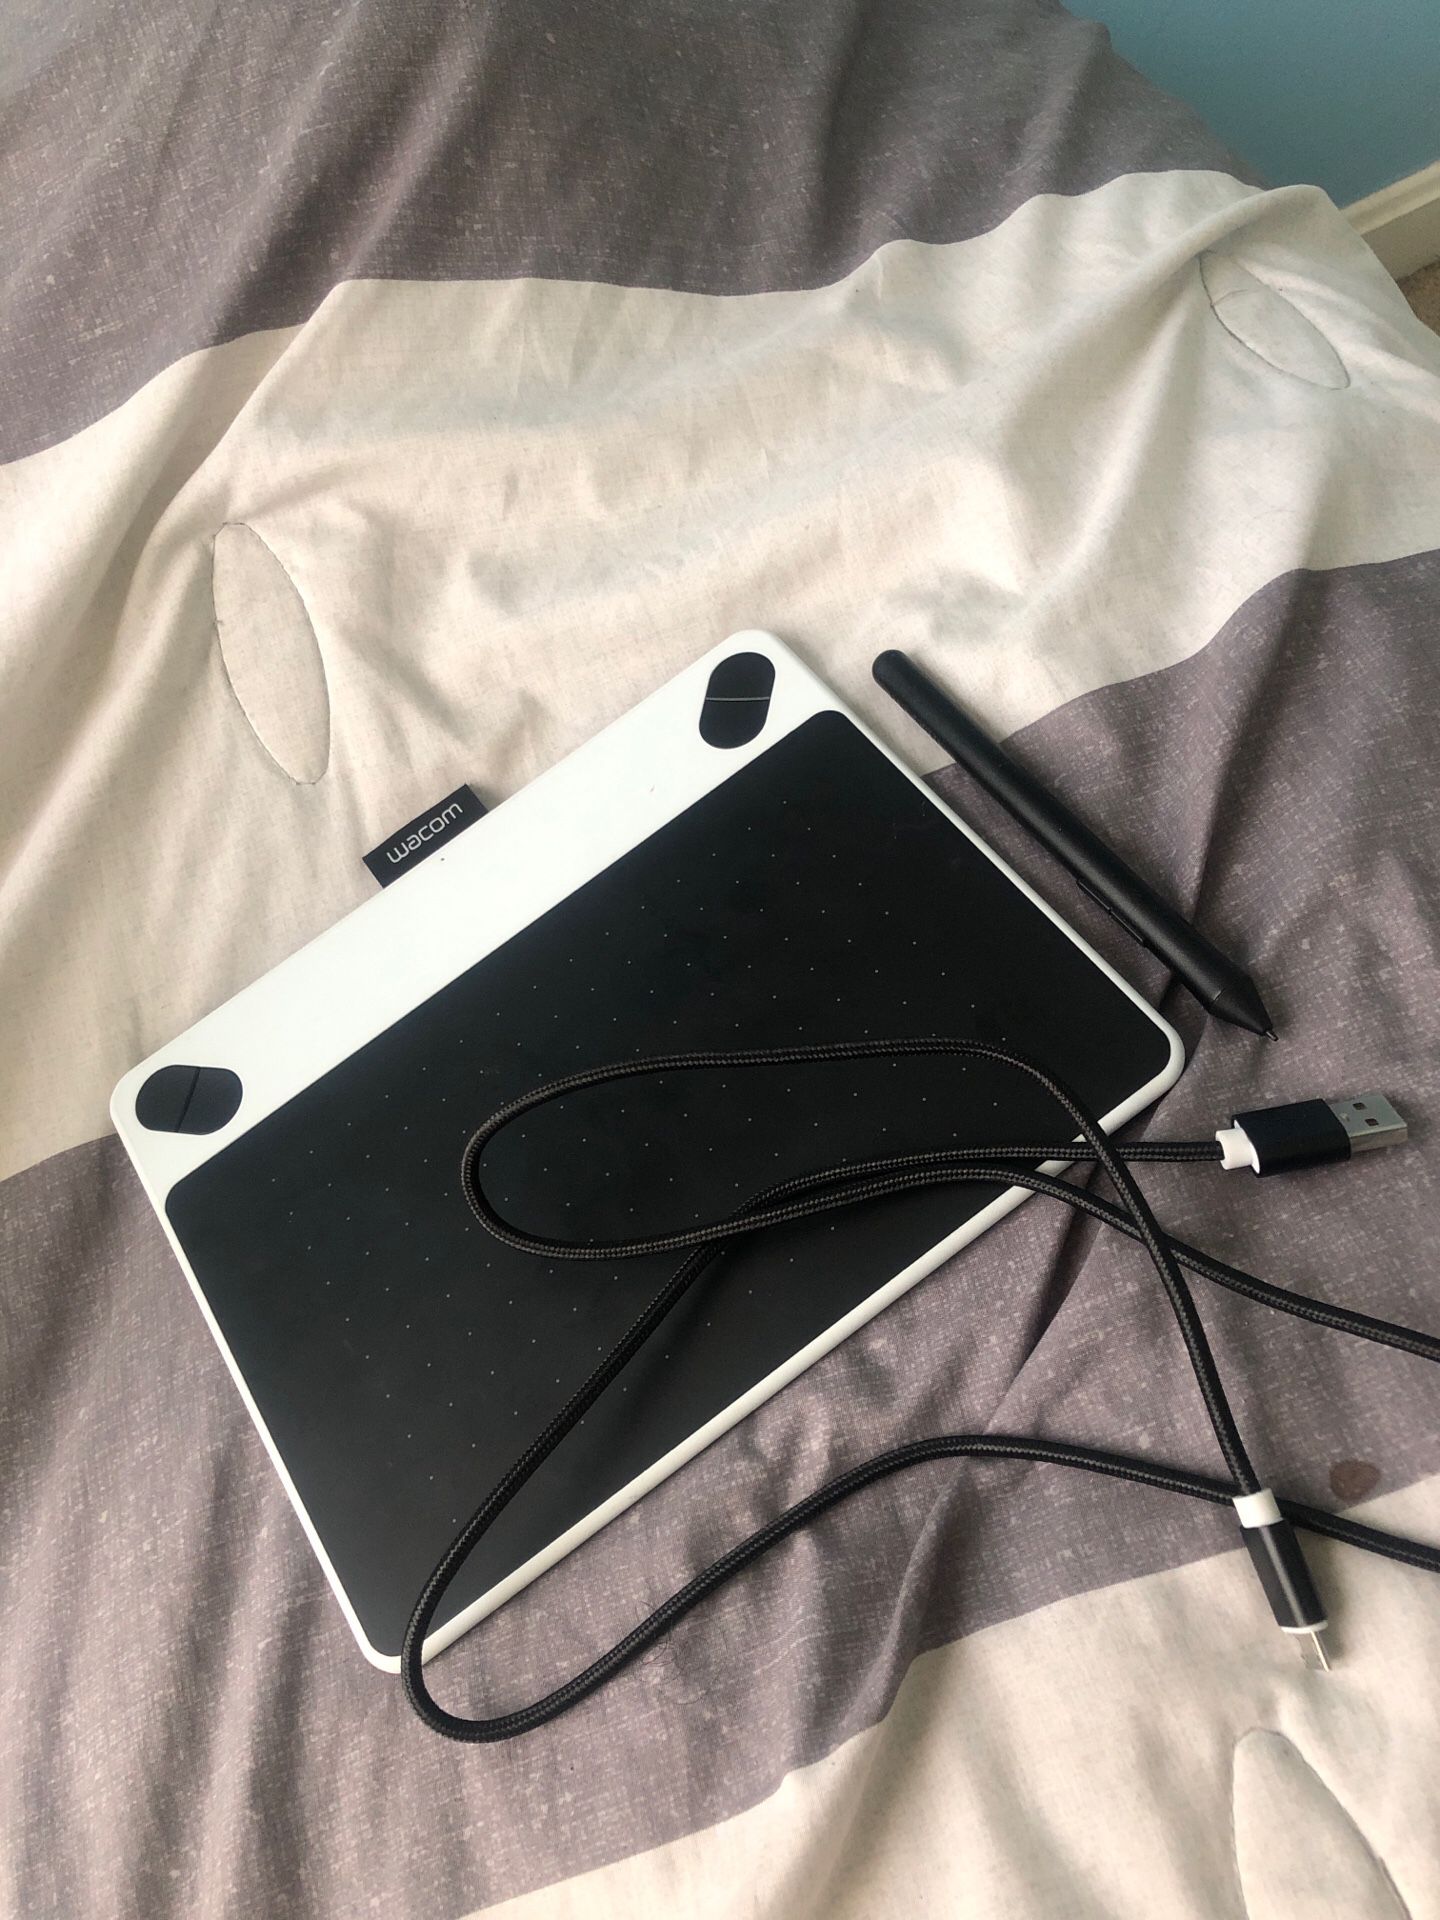 Wacom Intuos Drawing Tablet comes with wire and Pen!